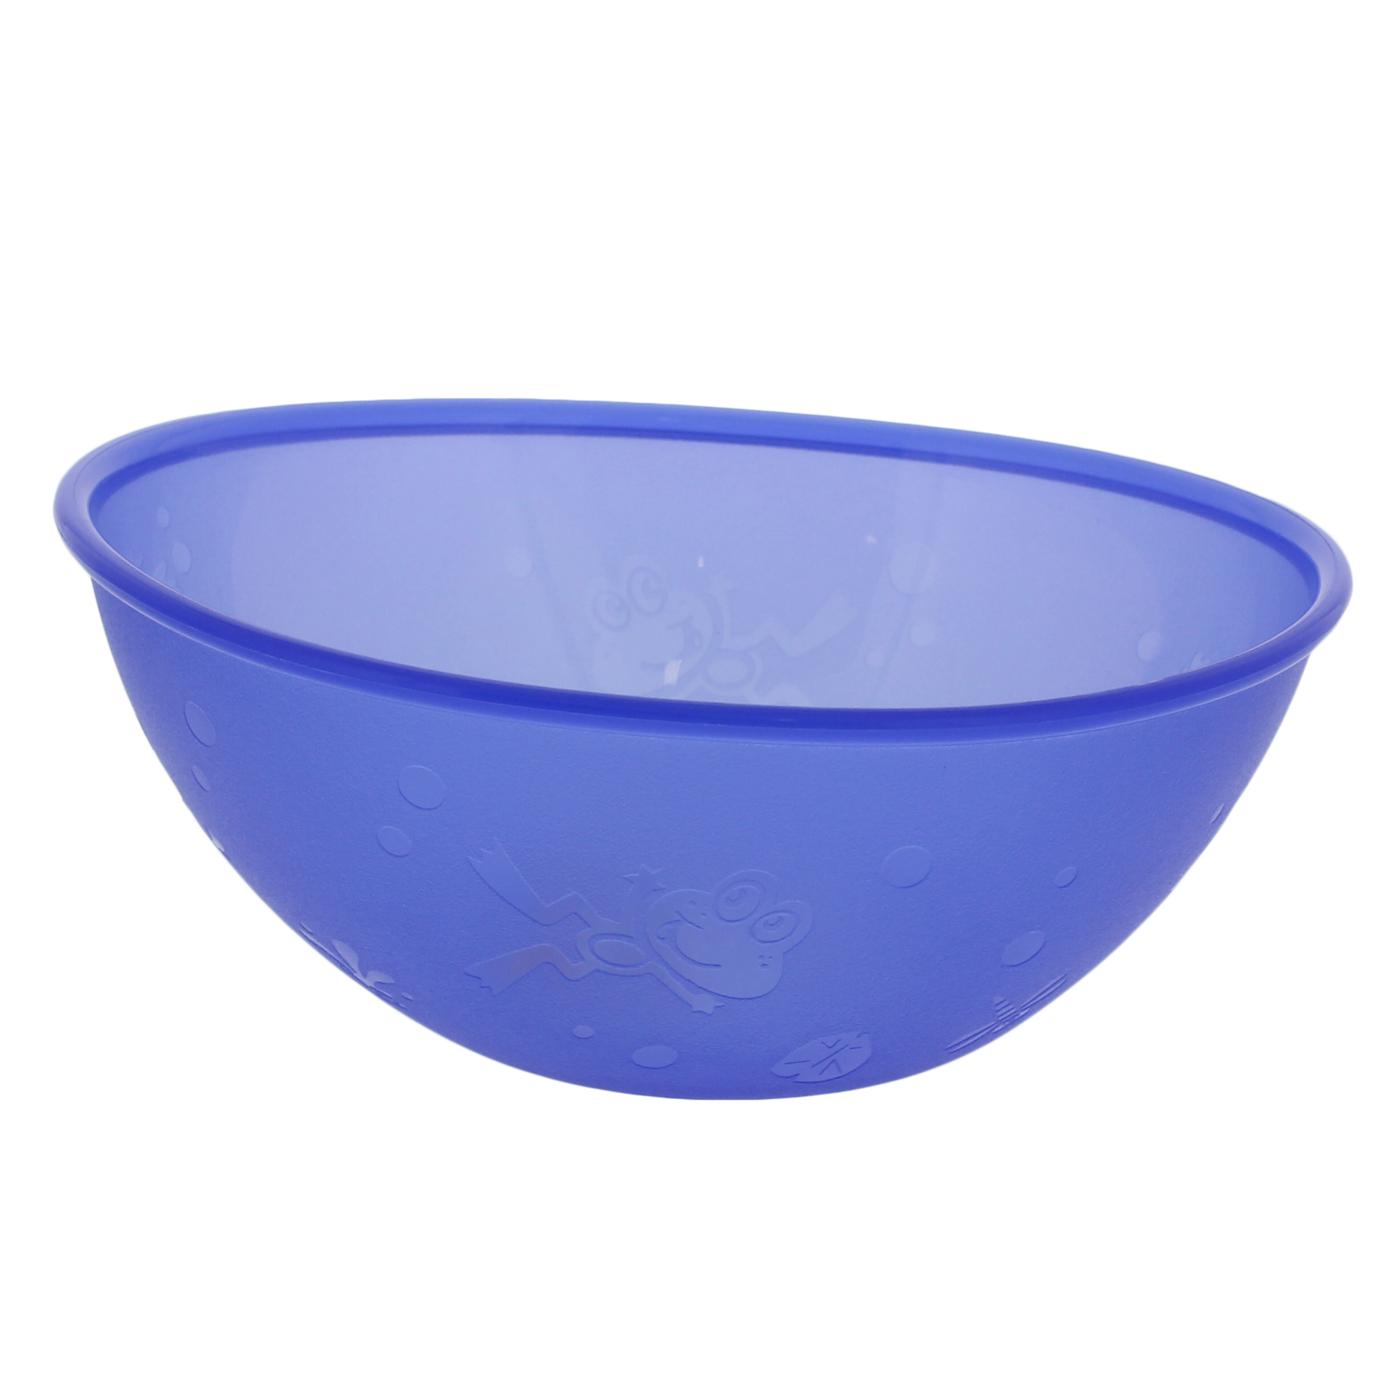 Nuby Embossed Value Feeding Bowl, Assorted Colors; image 5 of 6